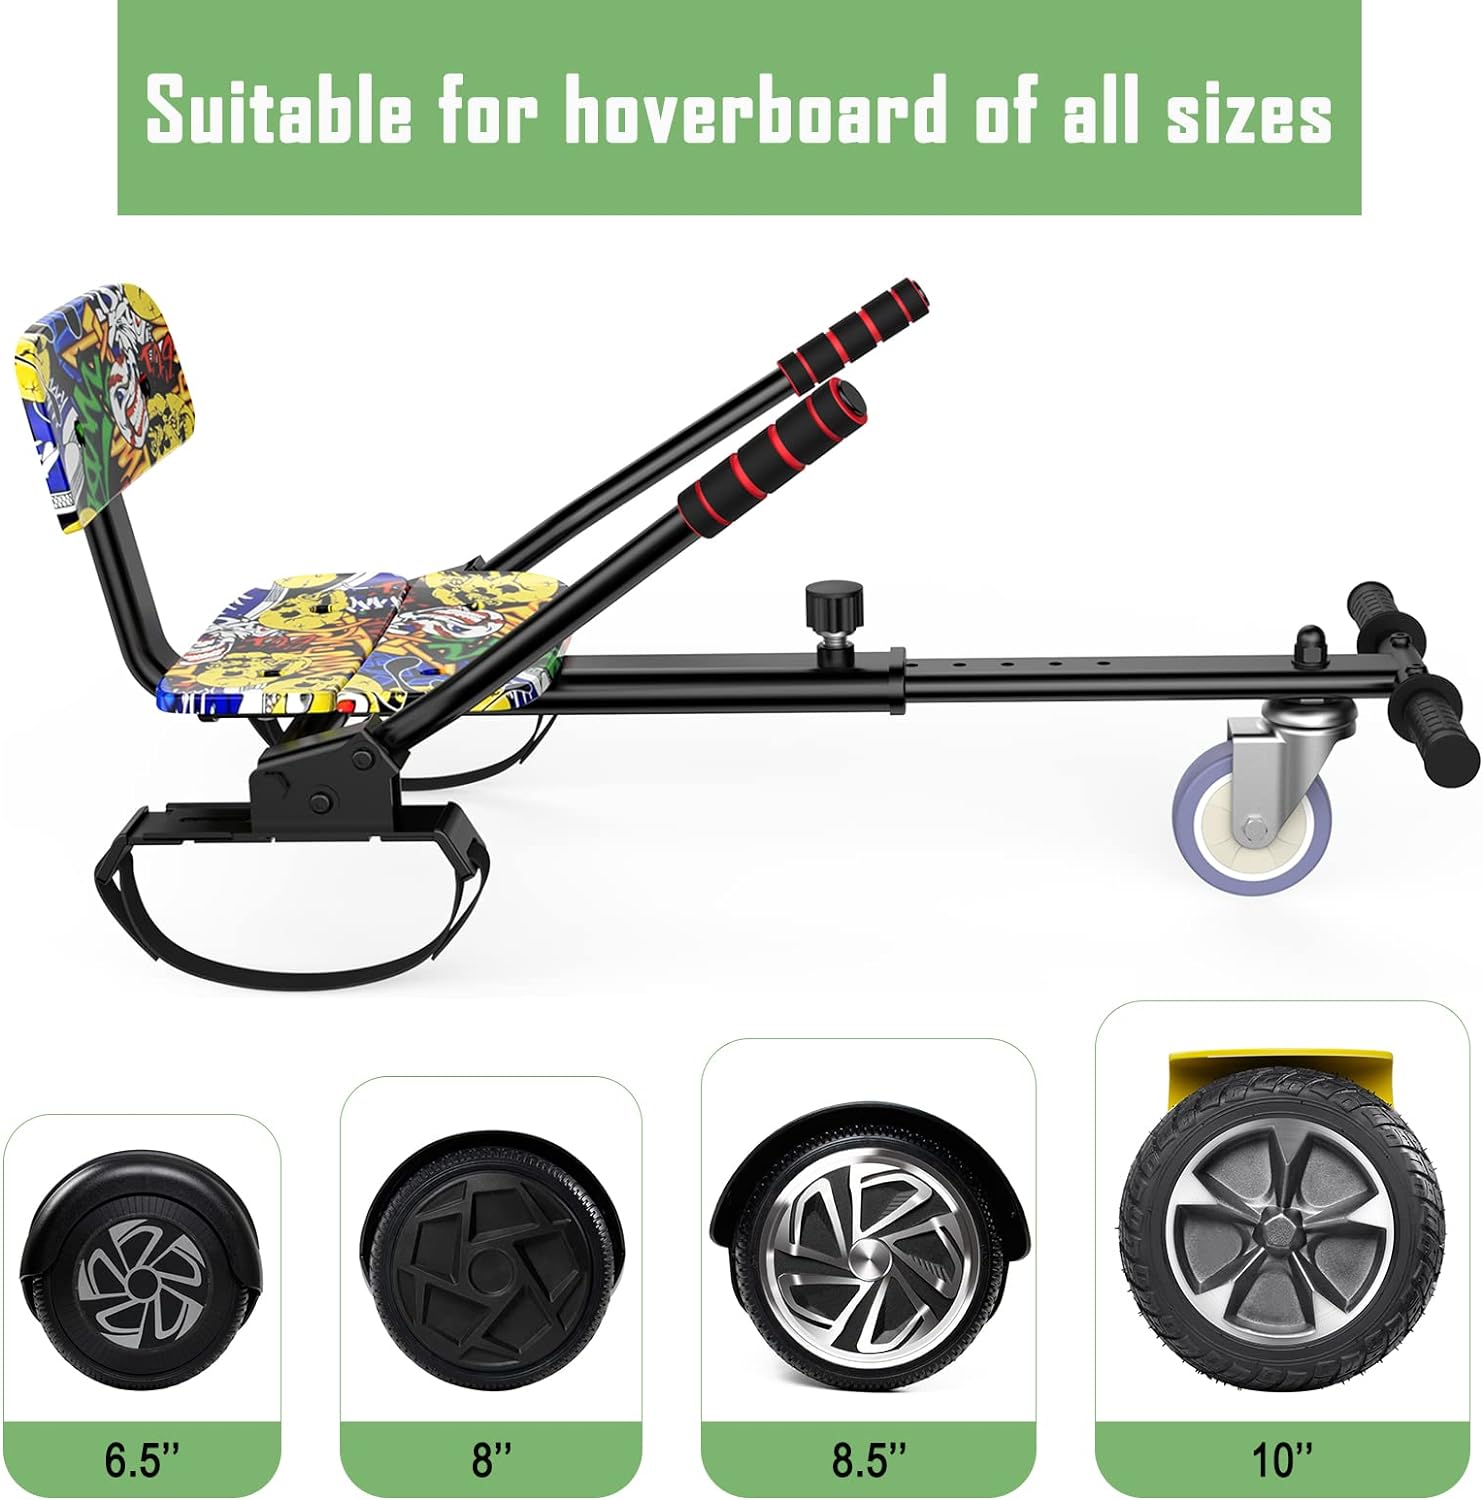 UNI-SUN Hoverboard, Hoverboard with Seat Attachment, Self Balancing Scooter with LED Lights, Hoverboards for Kids